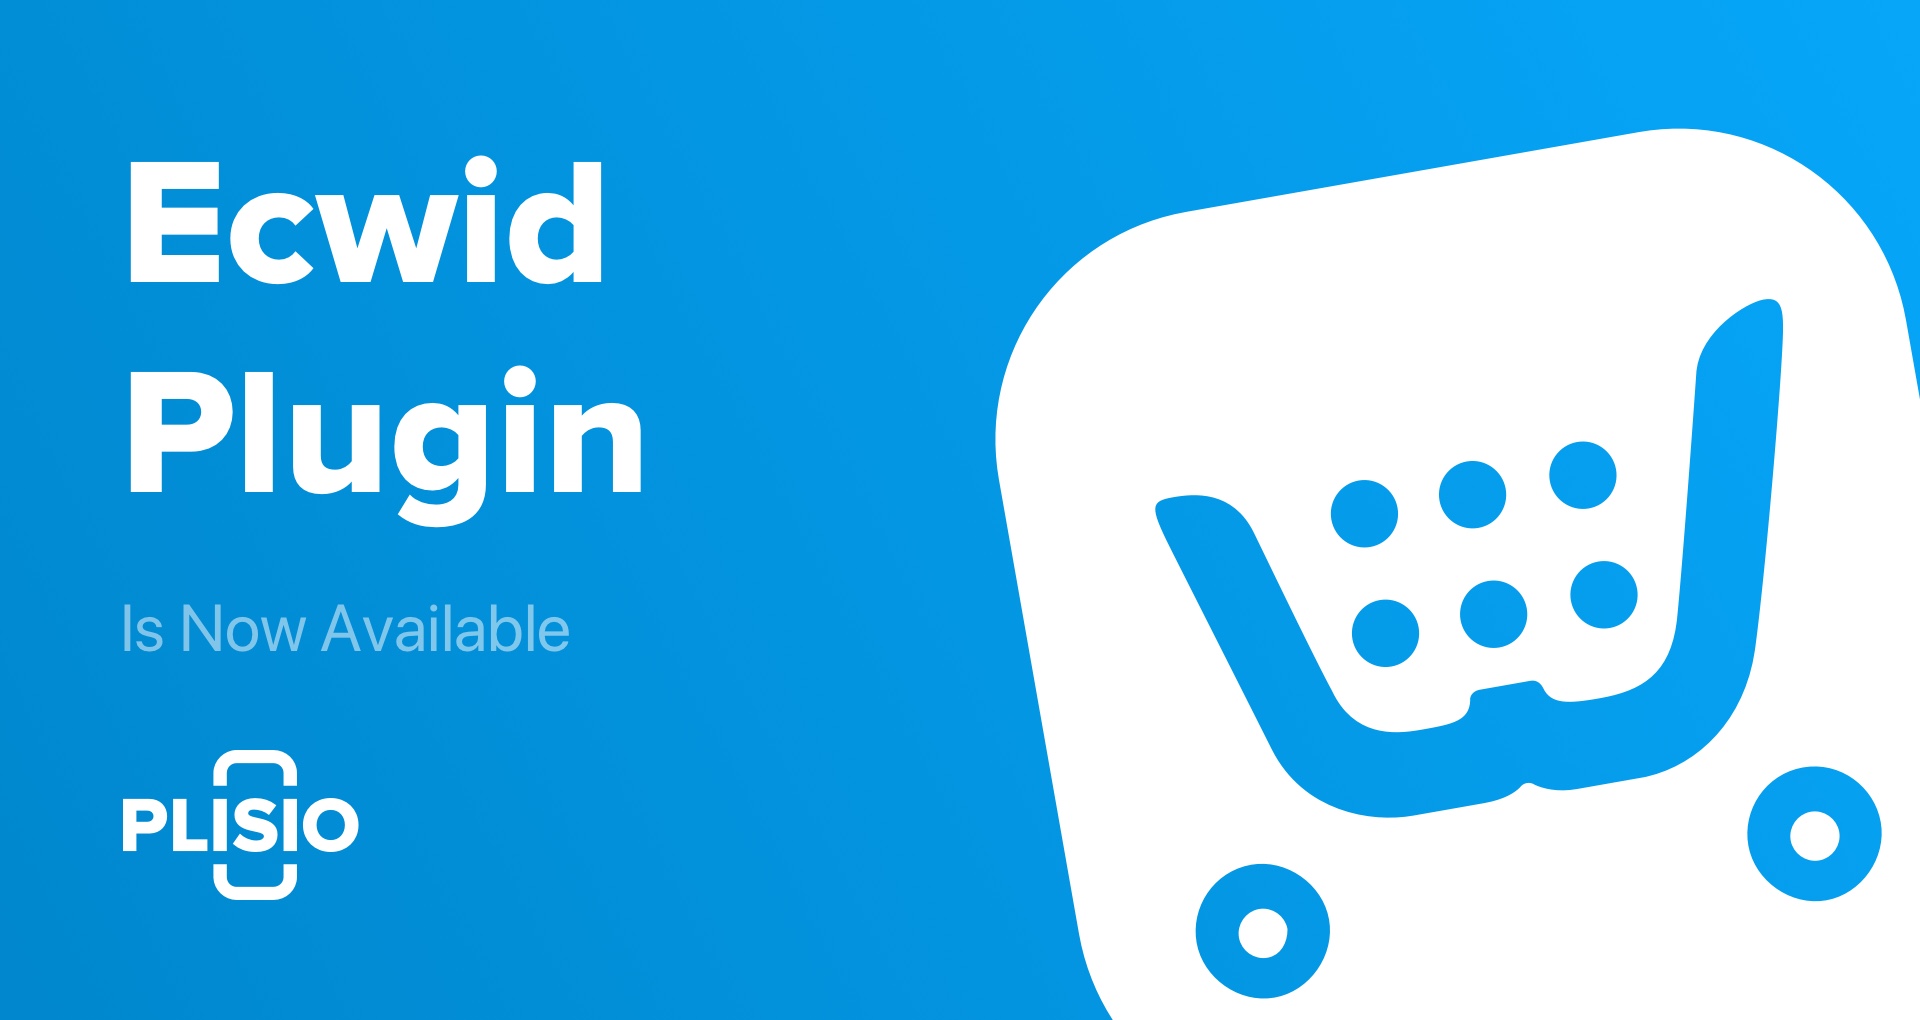 Ecwid plugin is already available. Add it right now!